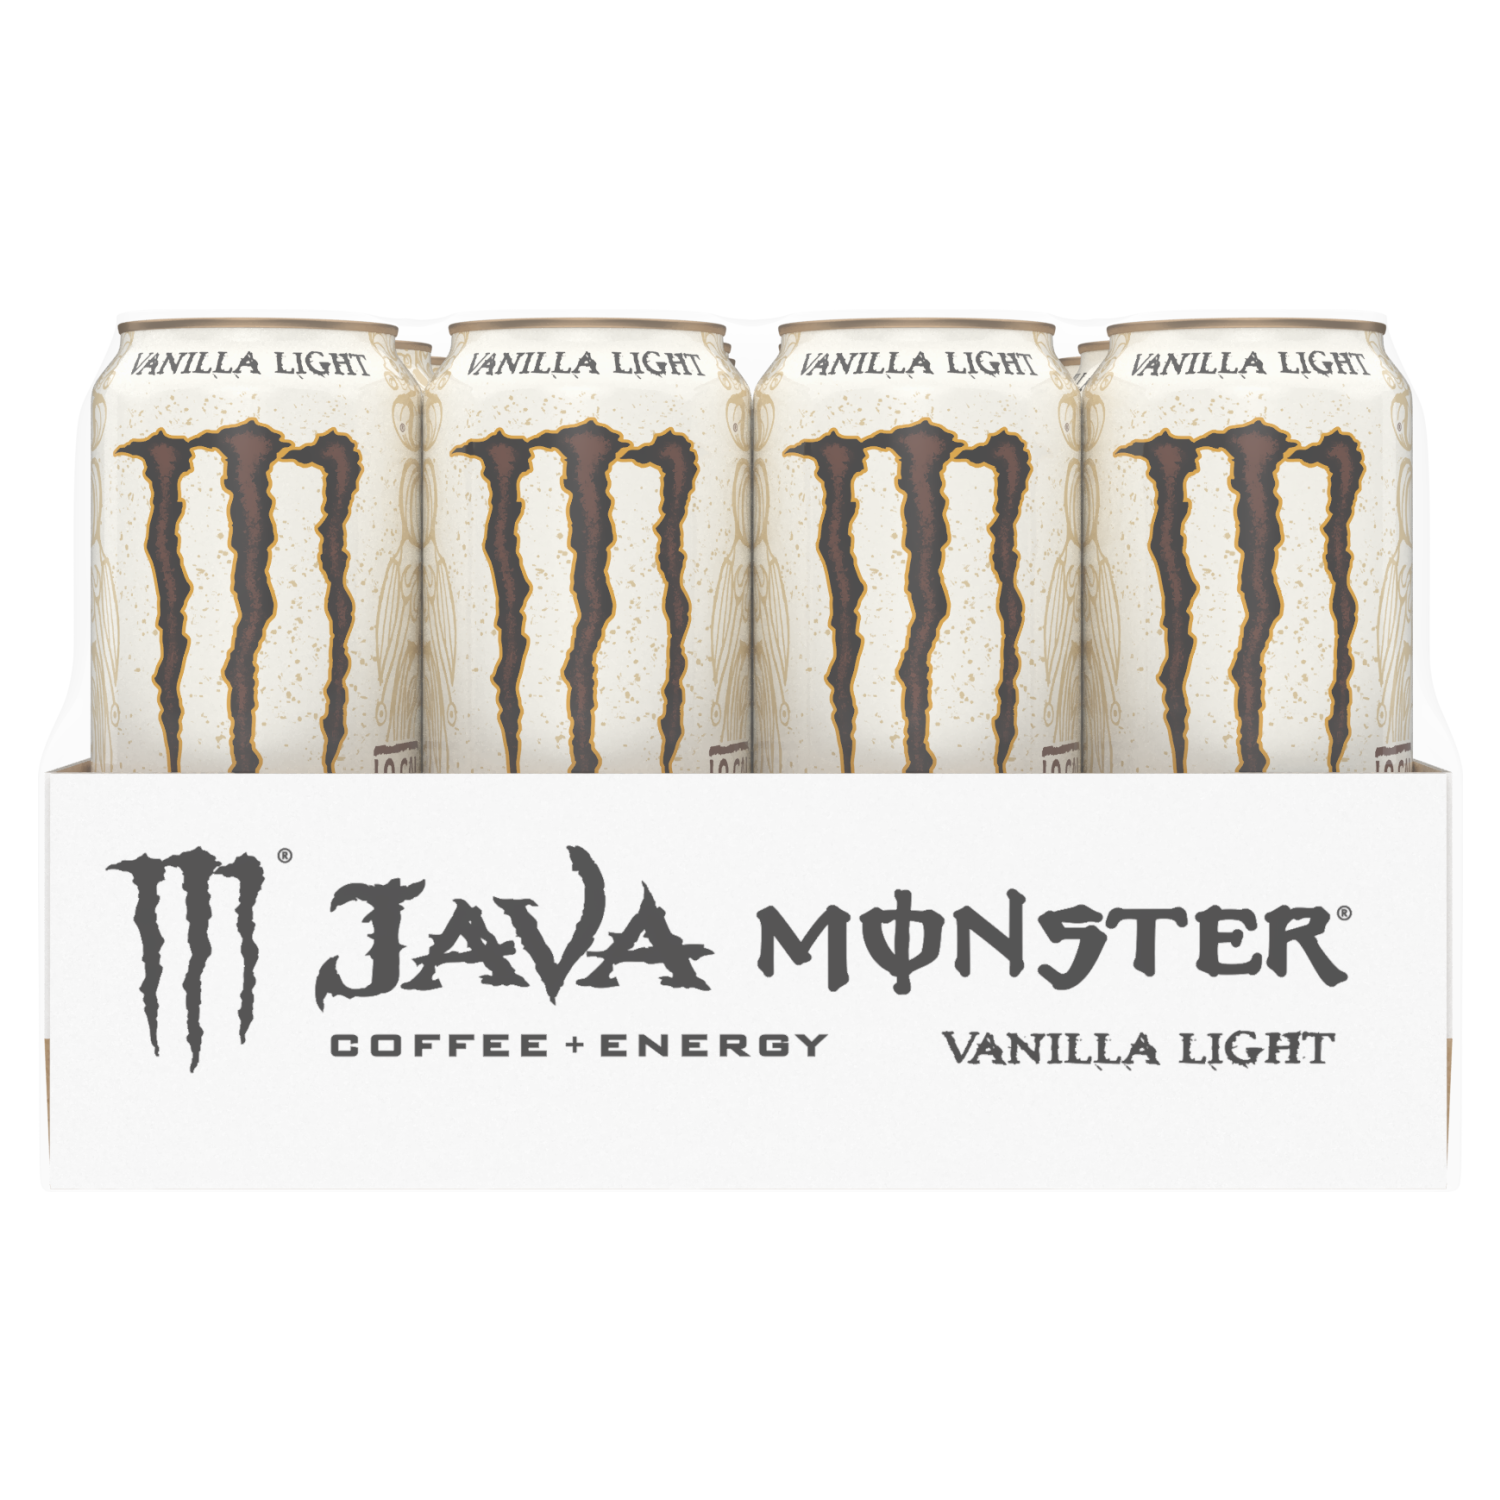 slide 5 of 5, Monster Energy How low can you go? Ounce for ounce Java Monster already has way less fat and calories than “Mega Bucks” bottled coffee. So why make Vanilla Light? Because our fearless leader is a health fanatic who counts calories like they're $100 dollar bills. Art vs. Science - Seriously, making a low calorie coffee + energy drink that tastes good and works, ain't that easy. Java Monster Vanilla Light sets a new standard for taste and effectiveness. Java Monster… premium coffee and cream brewed up with killer flavor, supercharged with Monster energy blend., 15 oz